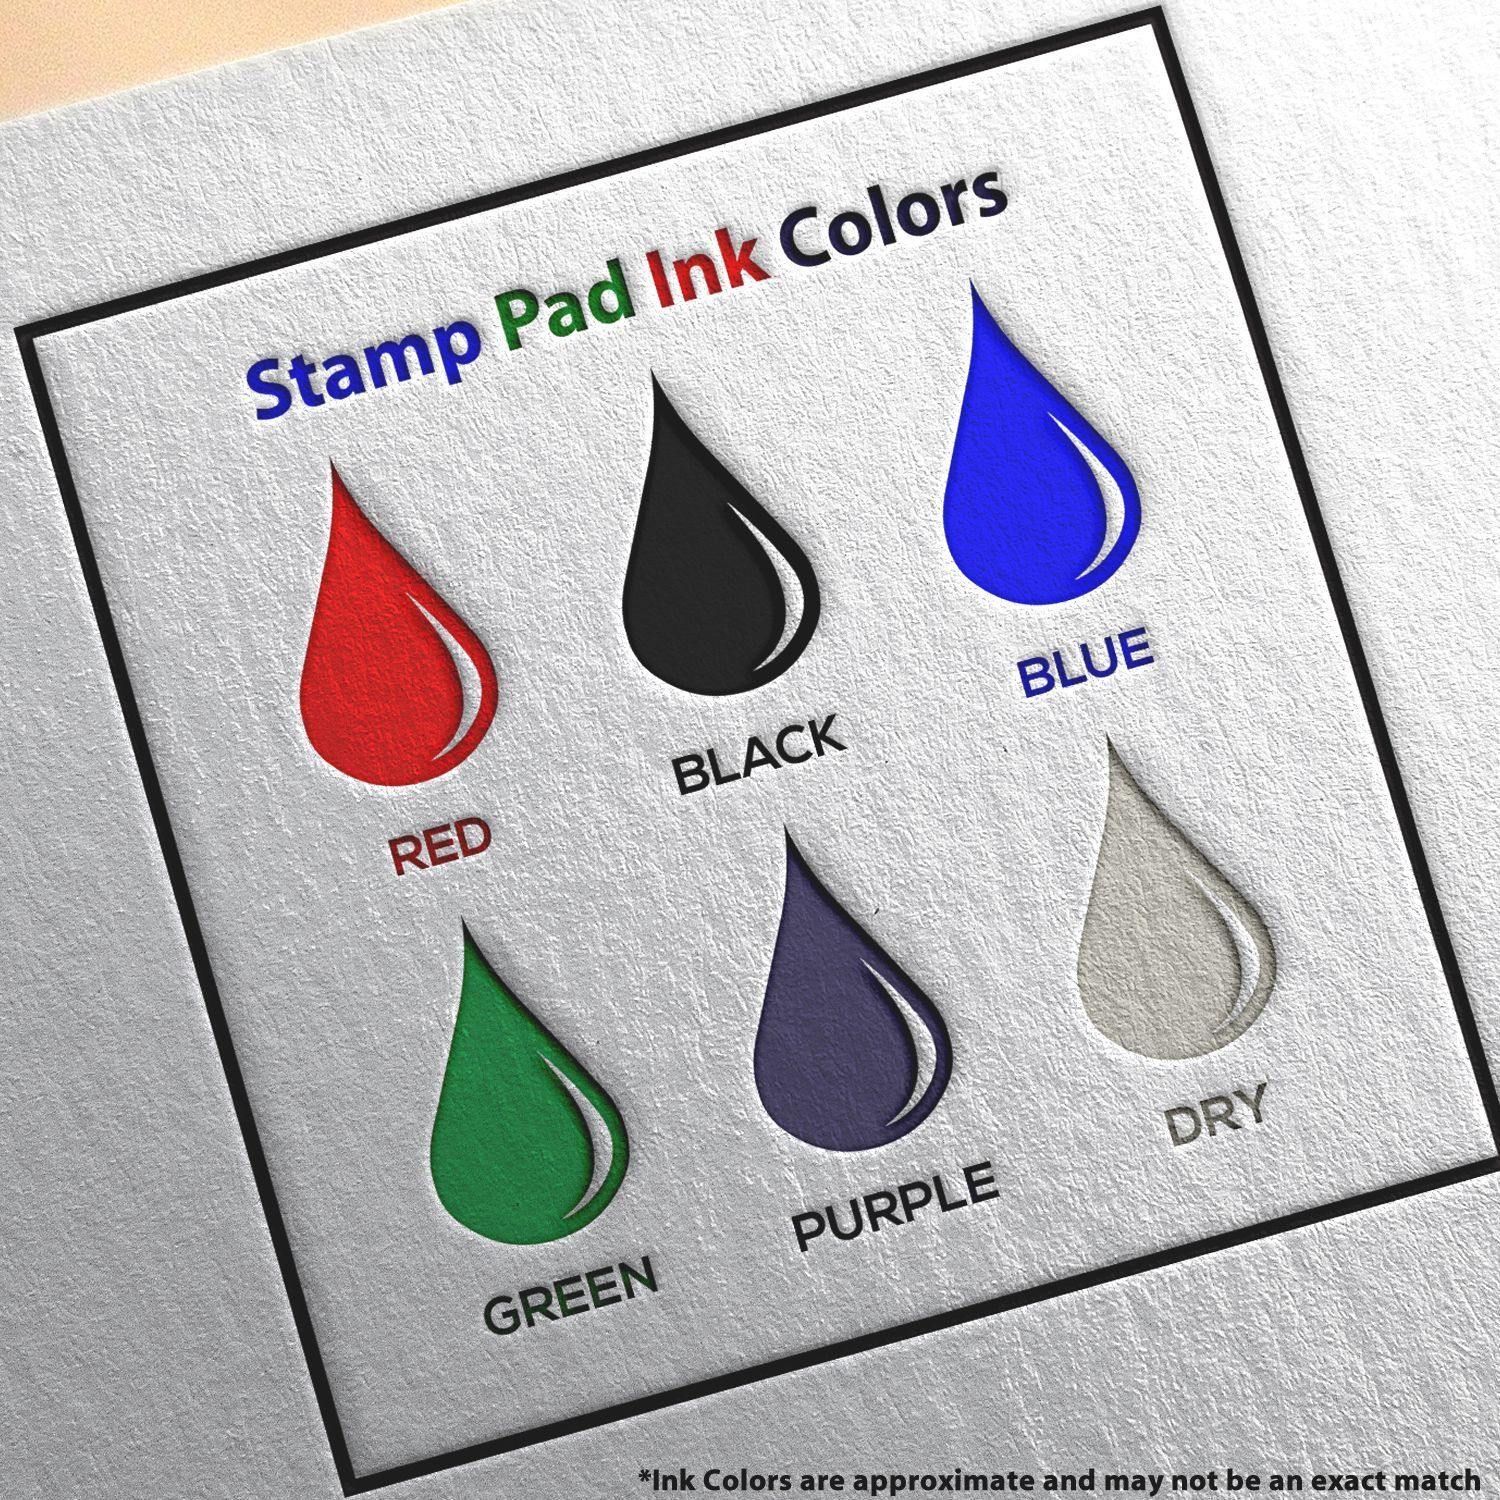 Rubber Stamp Pad 2 (Size: 3-1/4 x 6-1/4)